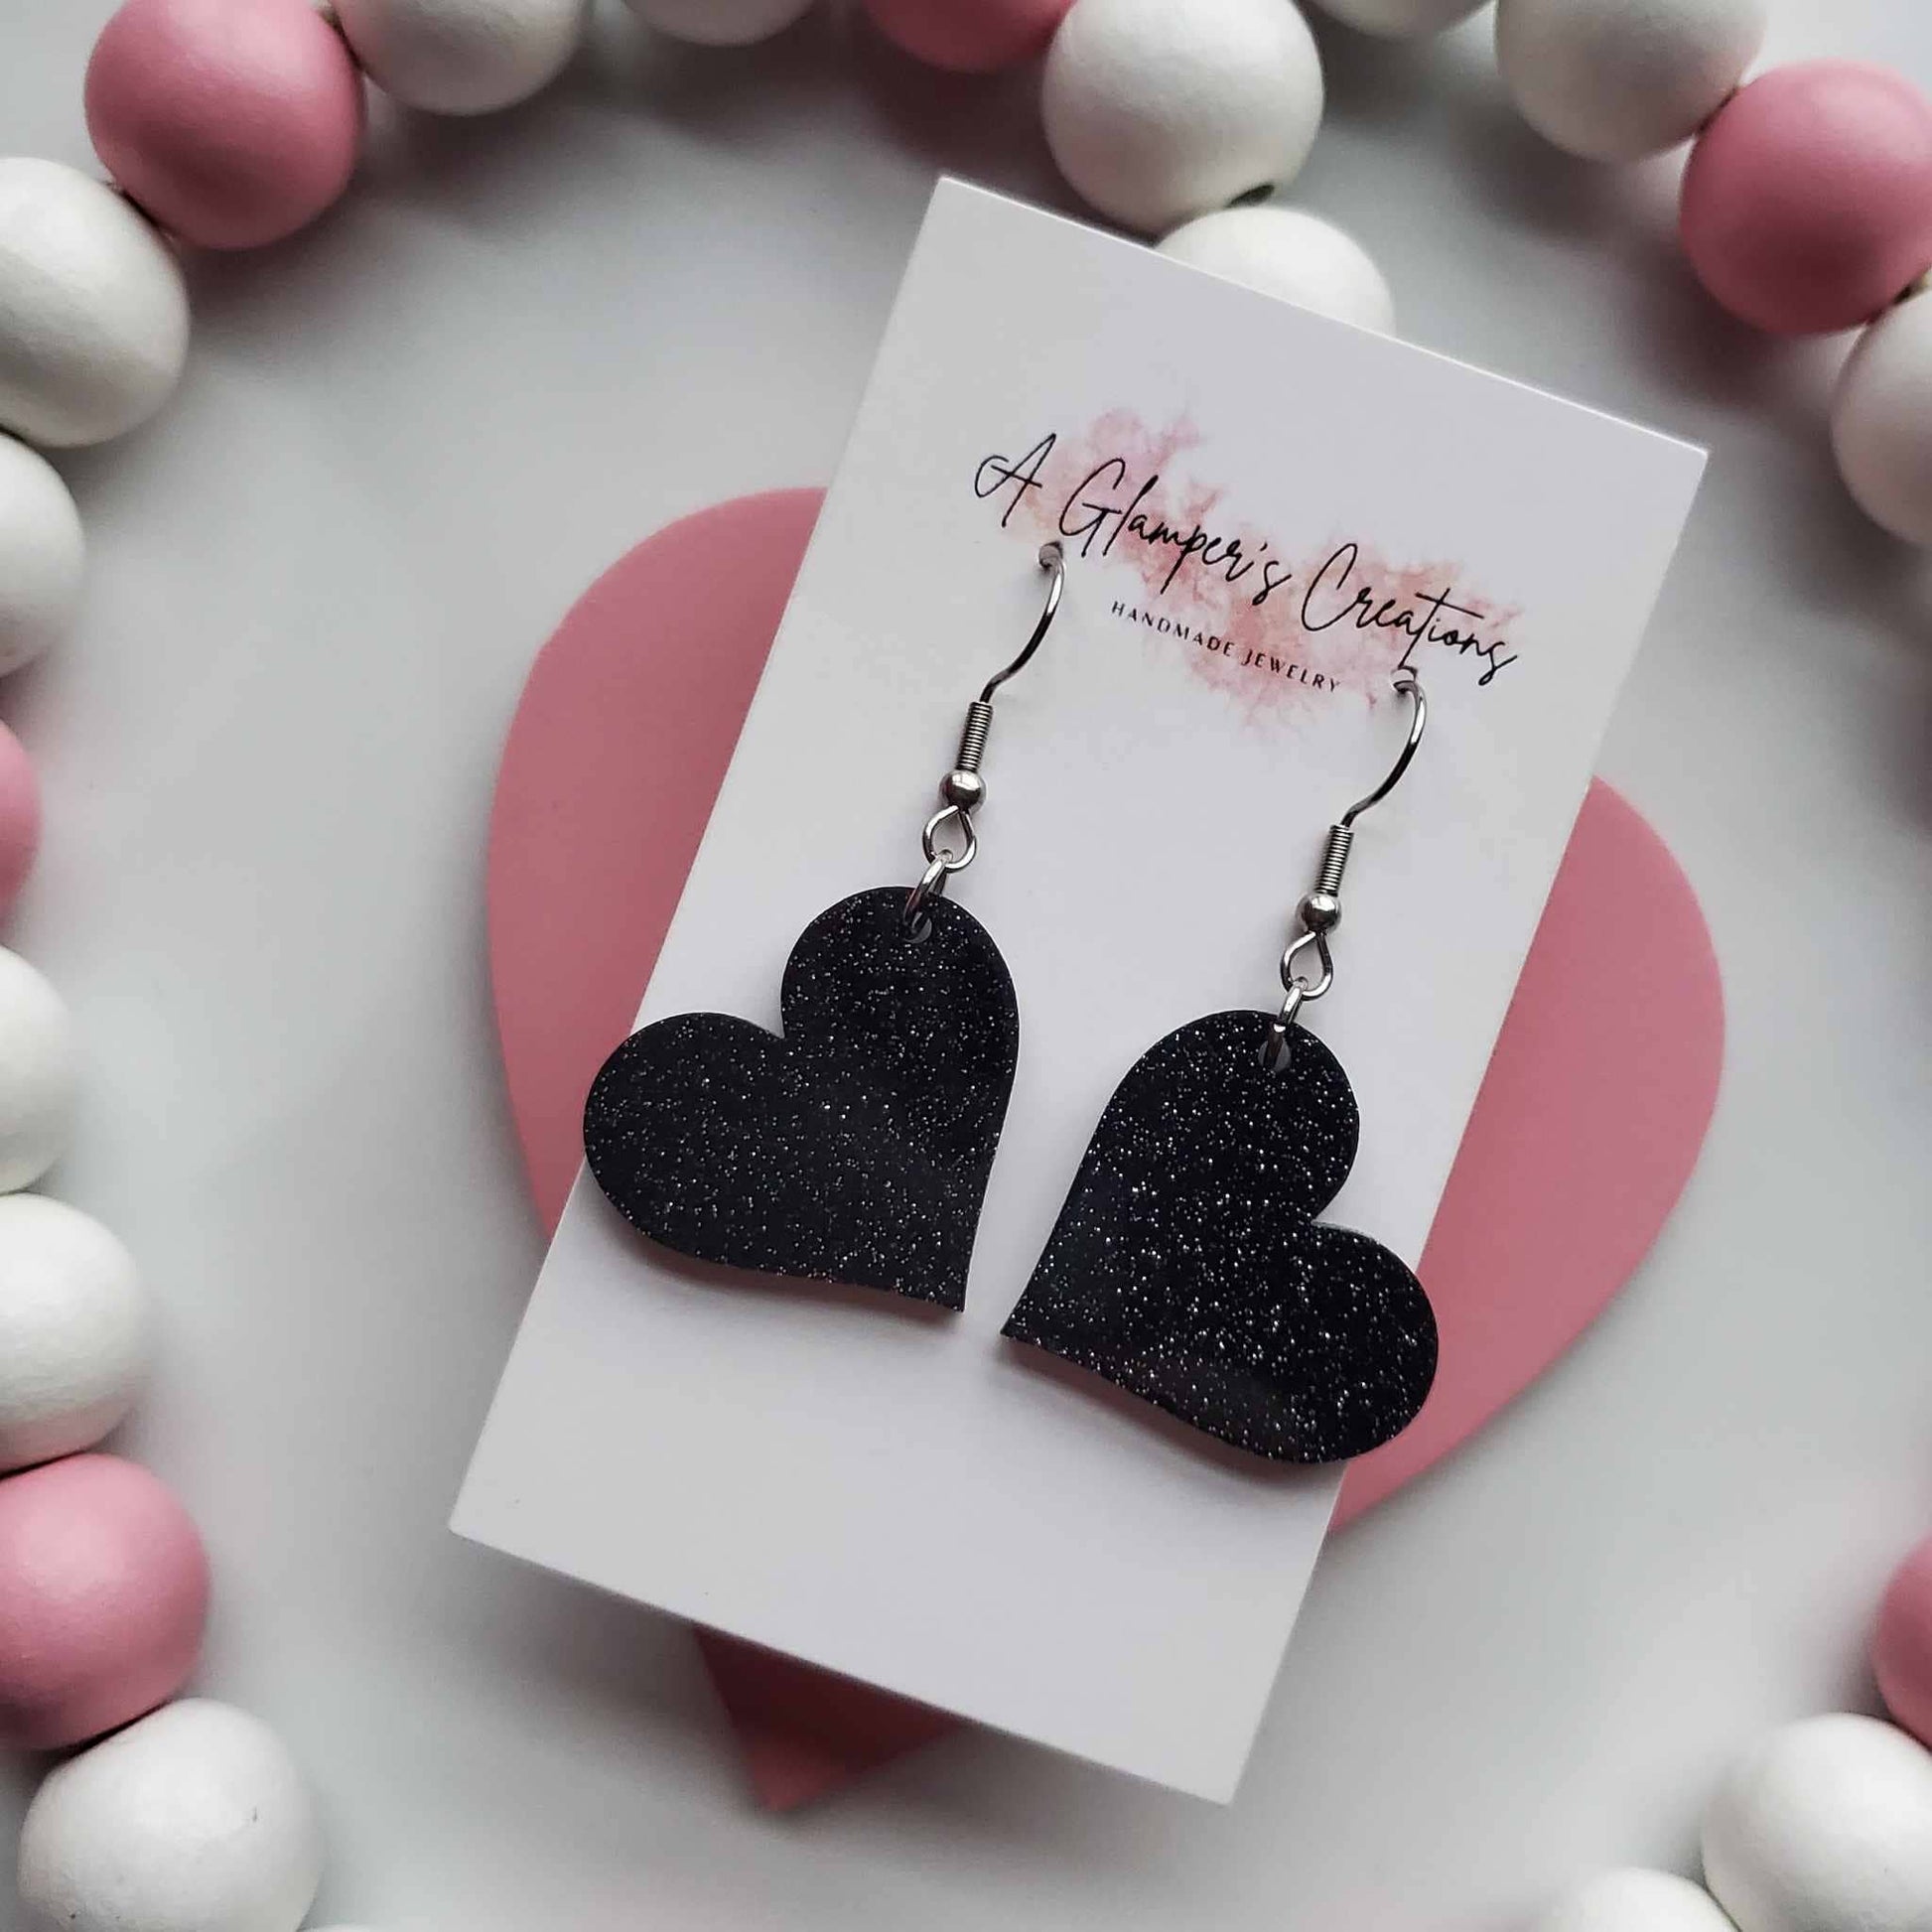 Black glitter heart earrings. Background is white and has white and dusty pink beads.